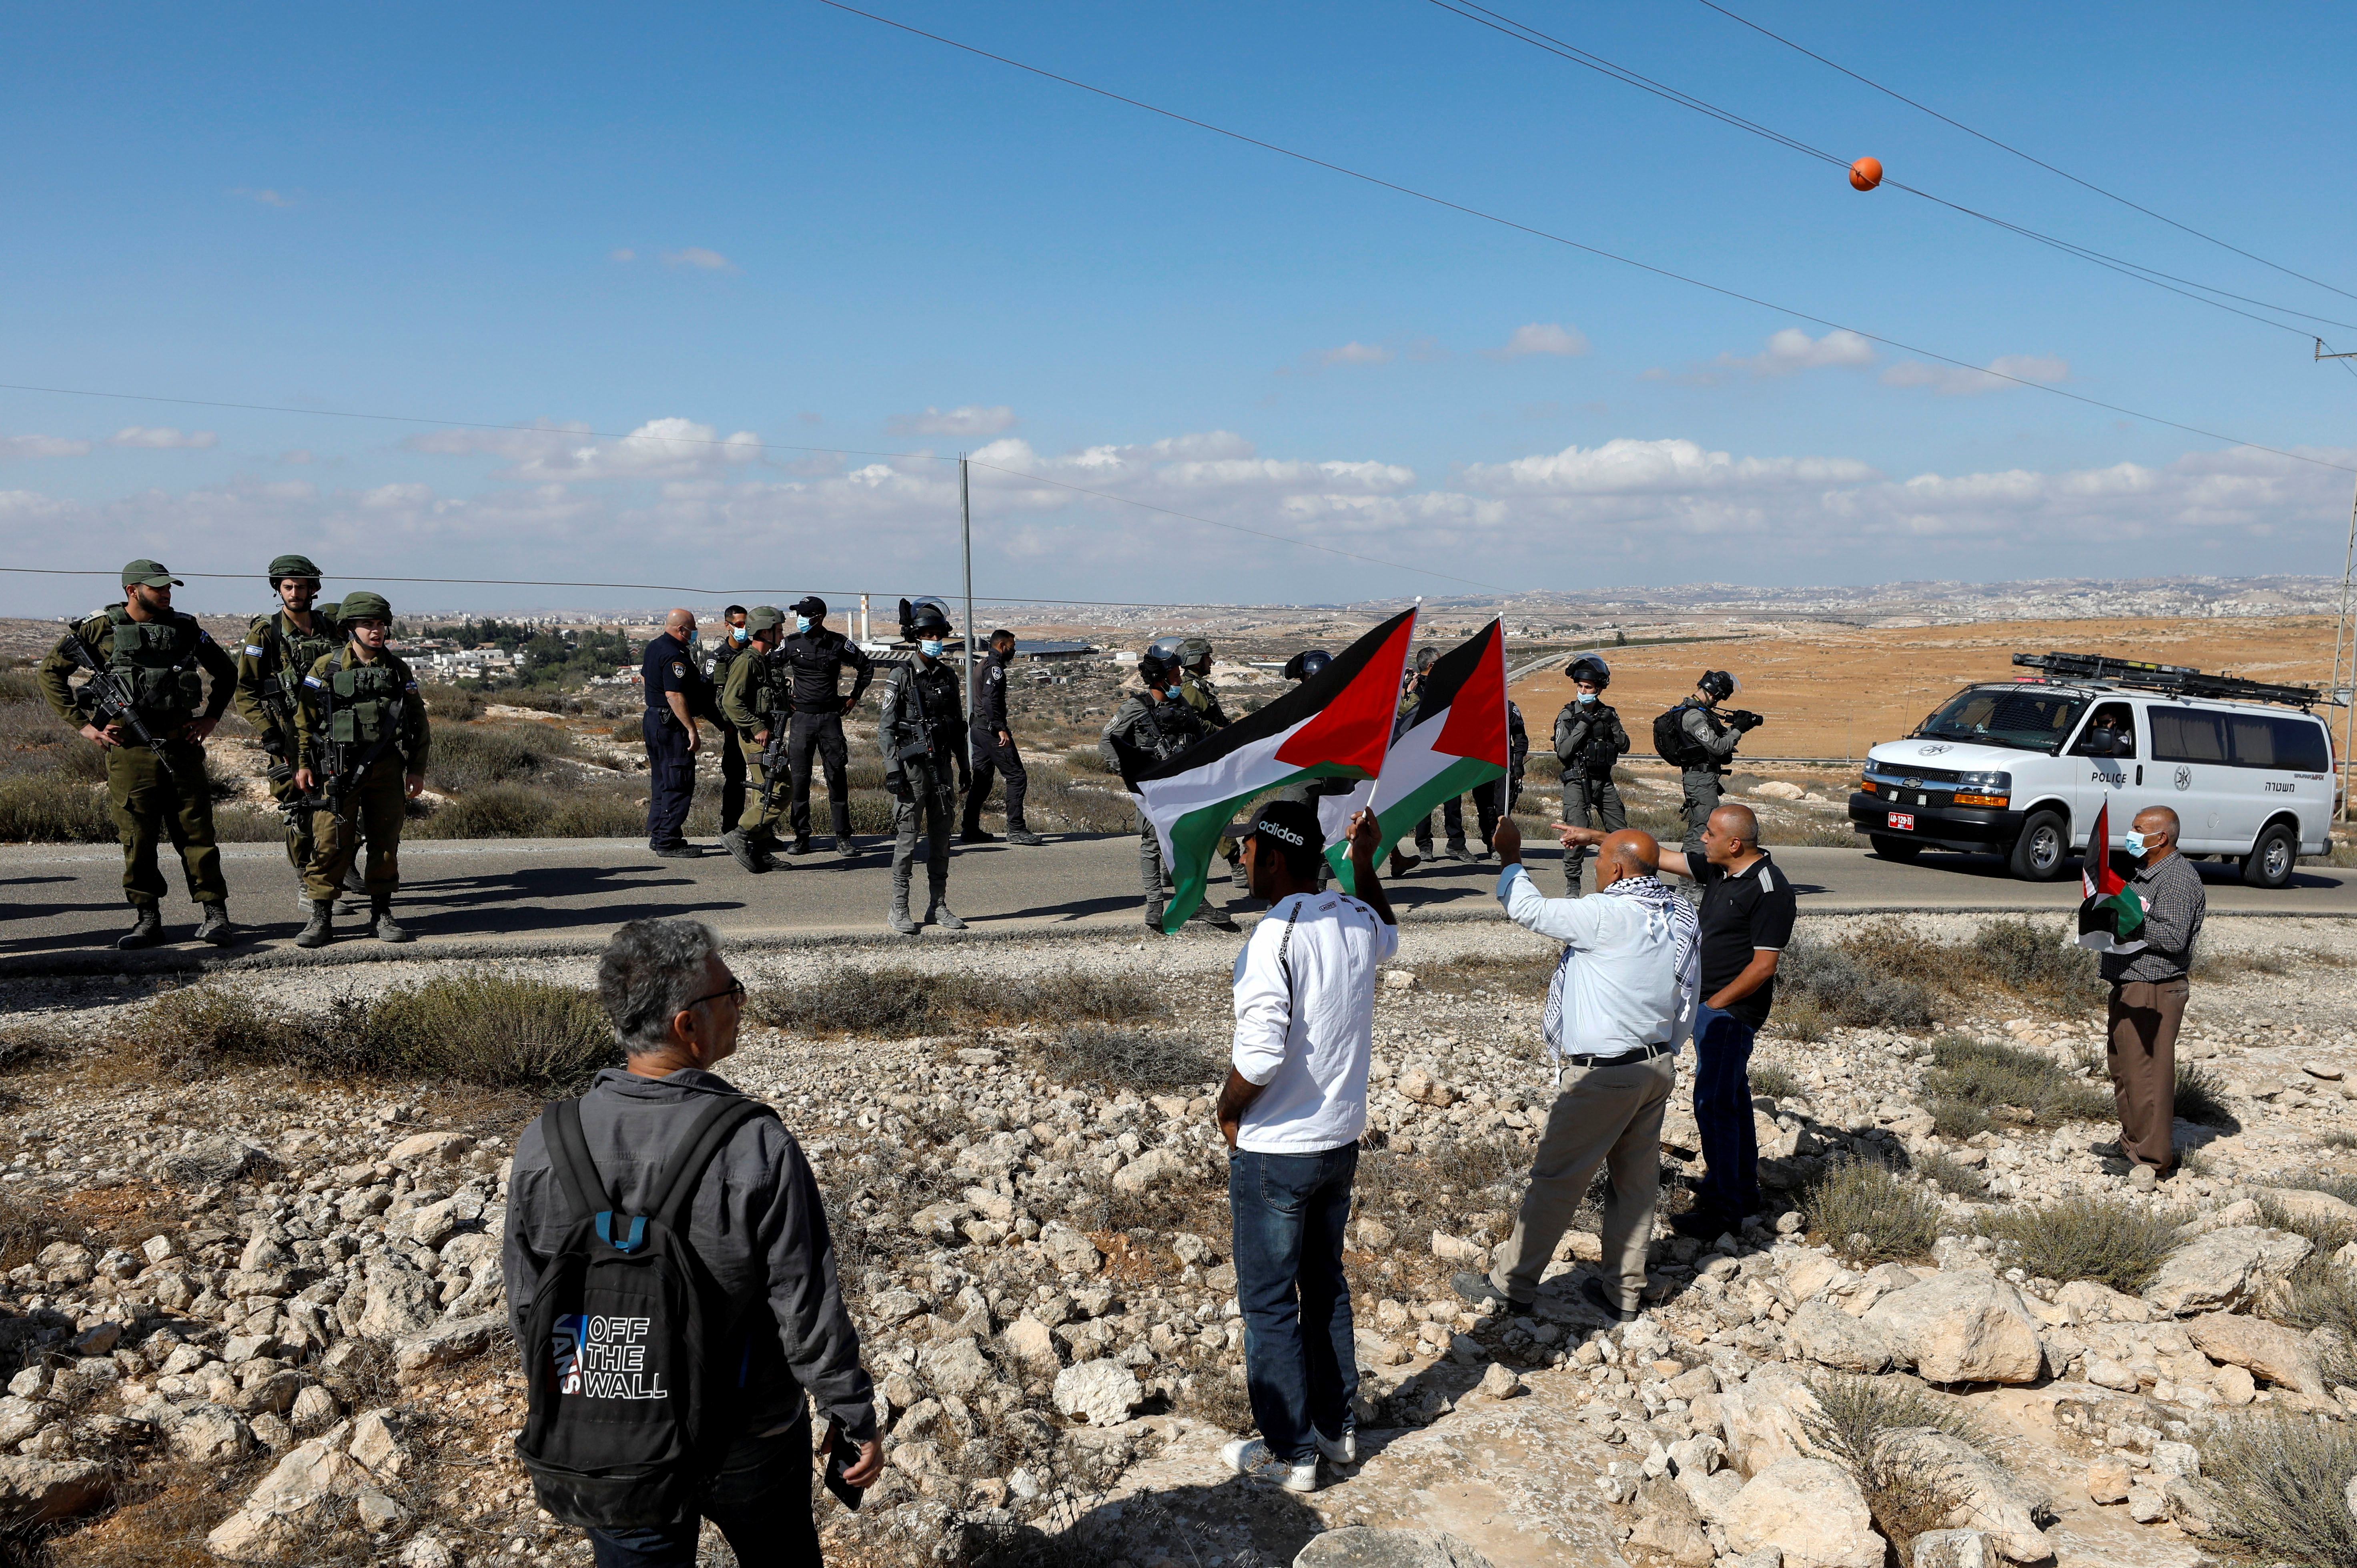 Palestinians protest against Israeli settlements in West Bank